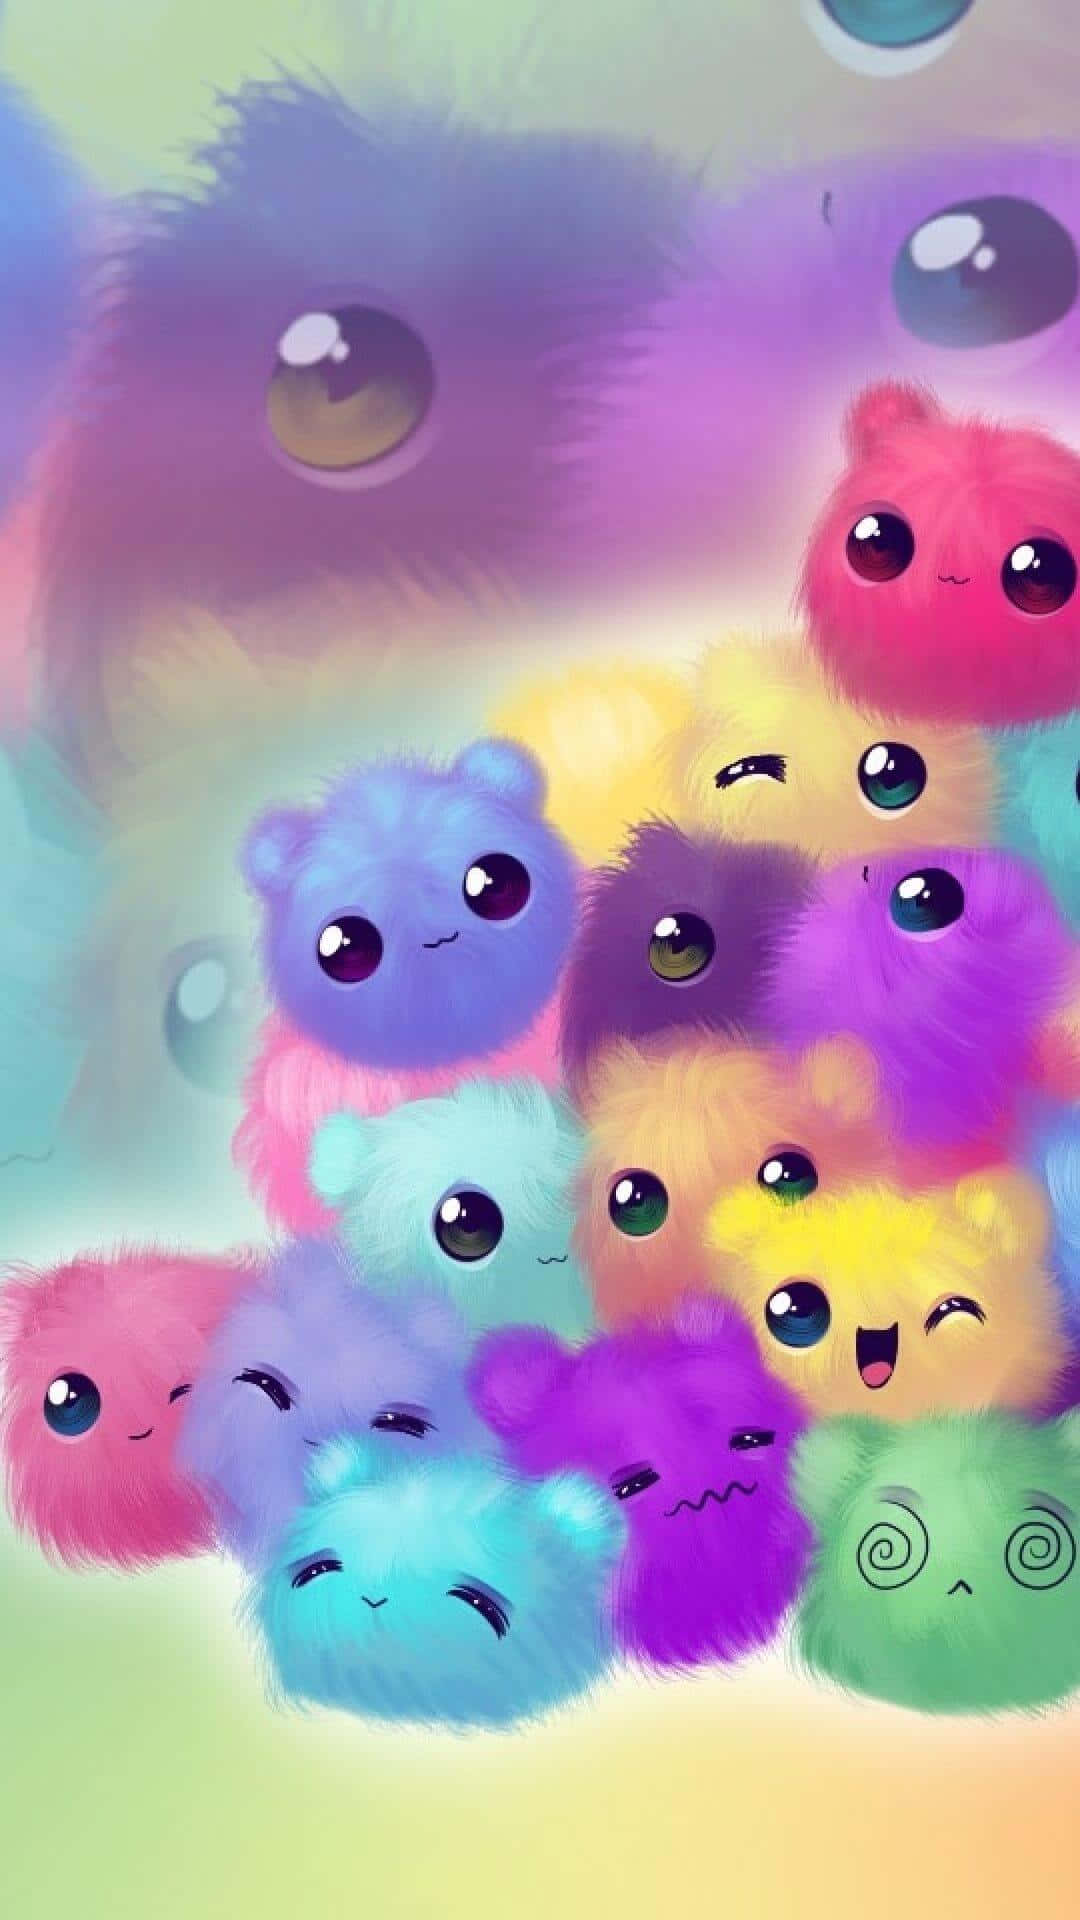 A Group Of Colorful Stuffed Animals In A Rainbow Wallpaper